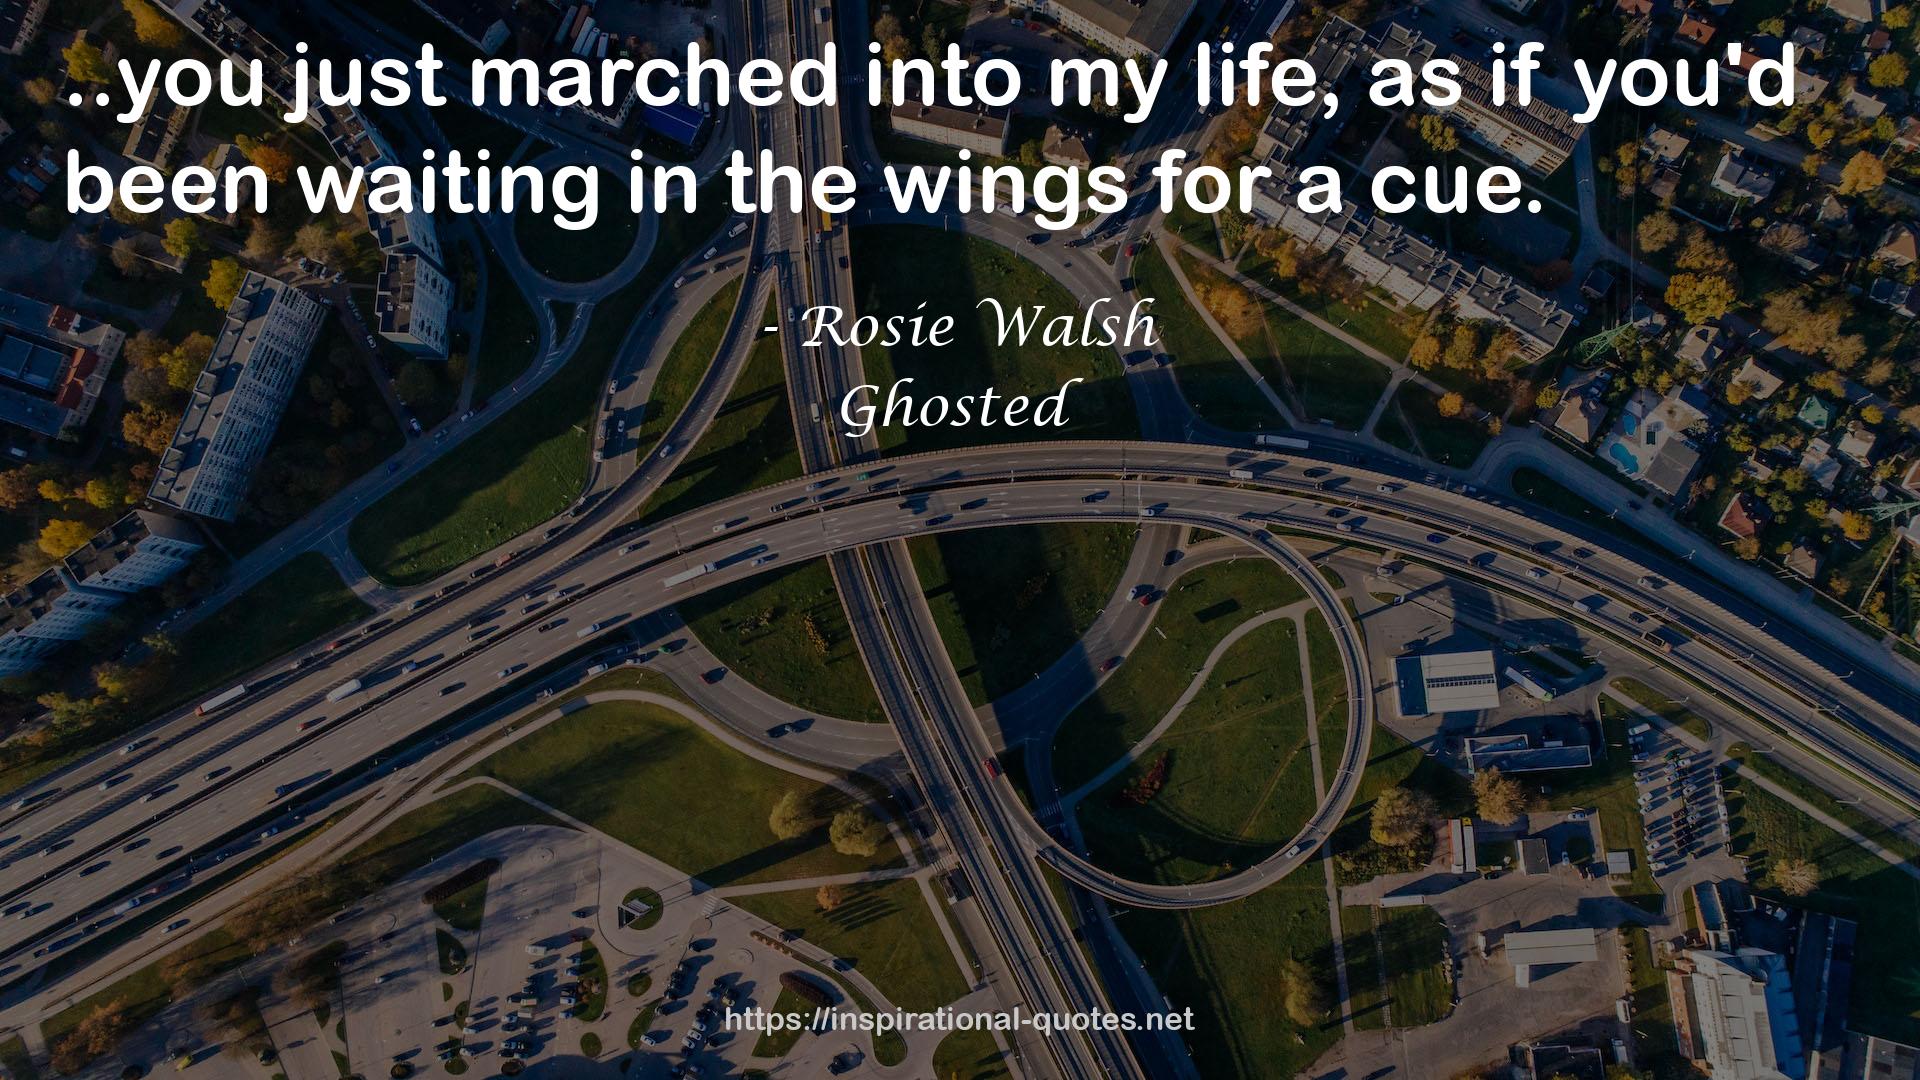 Rosie Walsh QUOTES